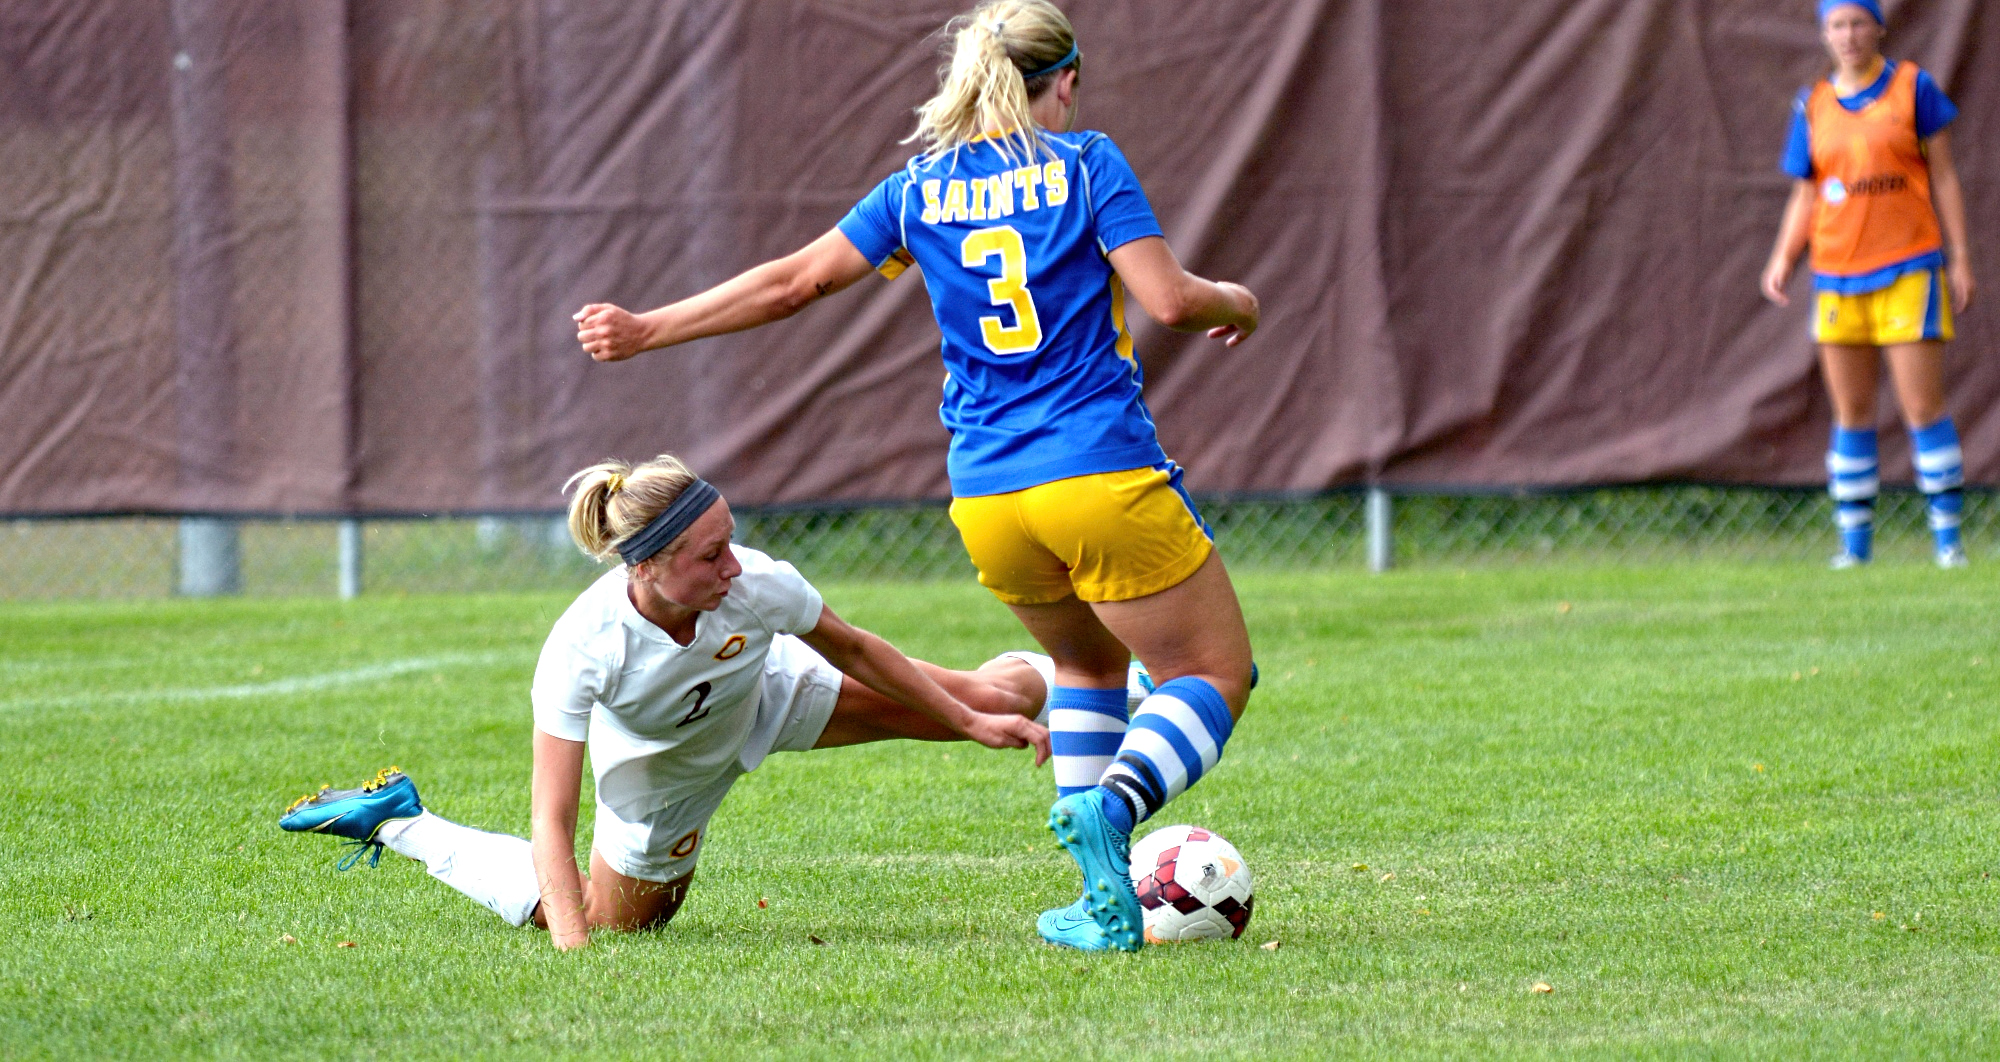 Sophomore central defender Katie Gillette sprawls on the ground to thwart a St. Scholastica offensive attack. She was named to the All-Tournament Team.